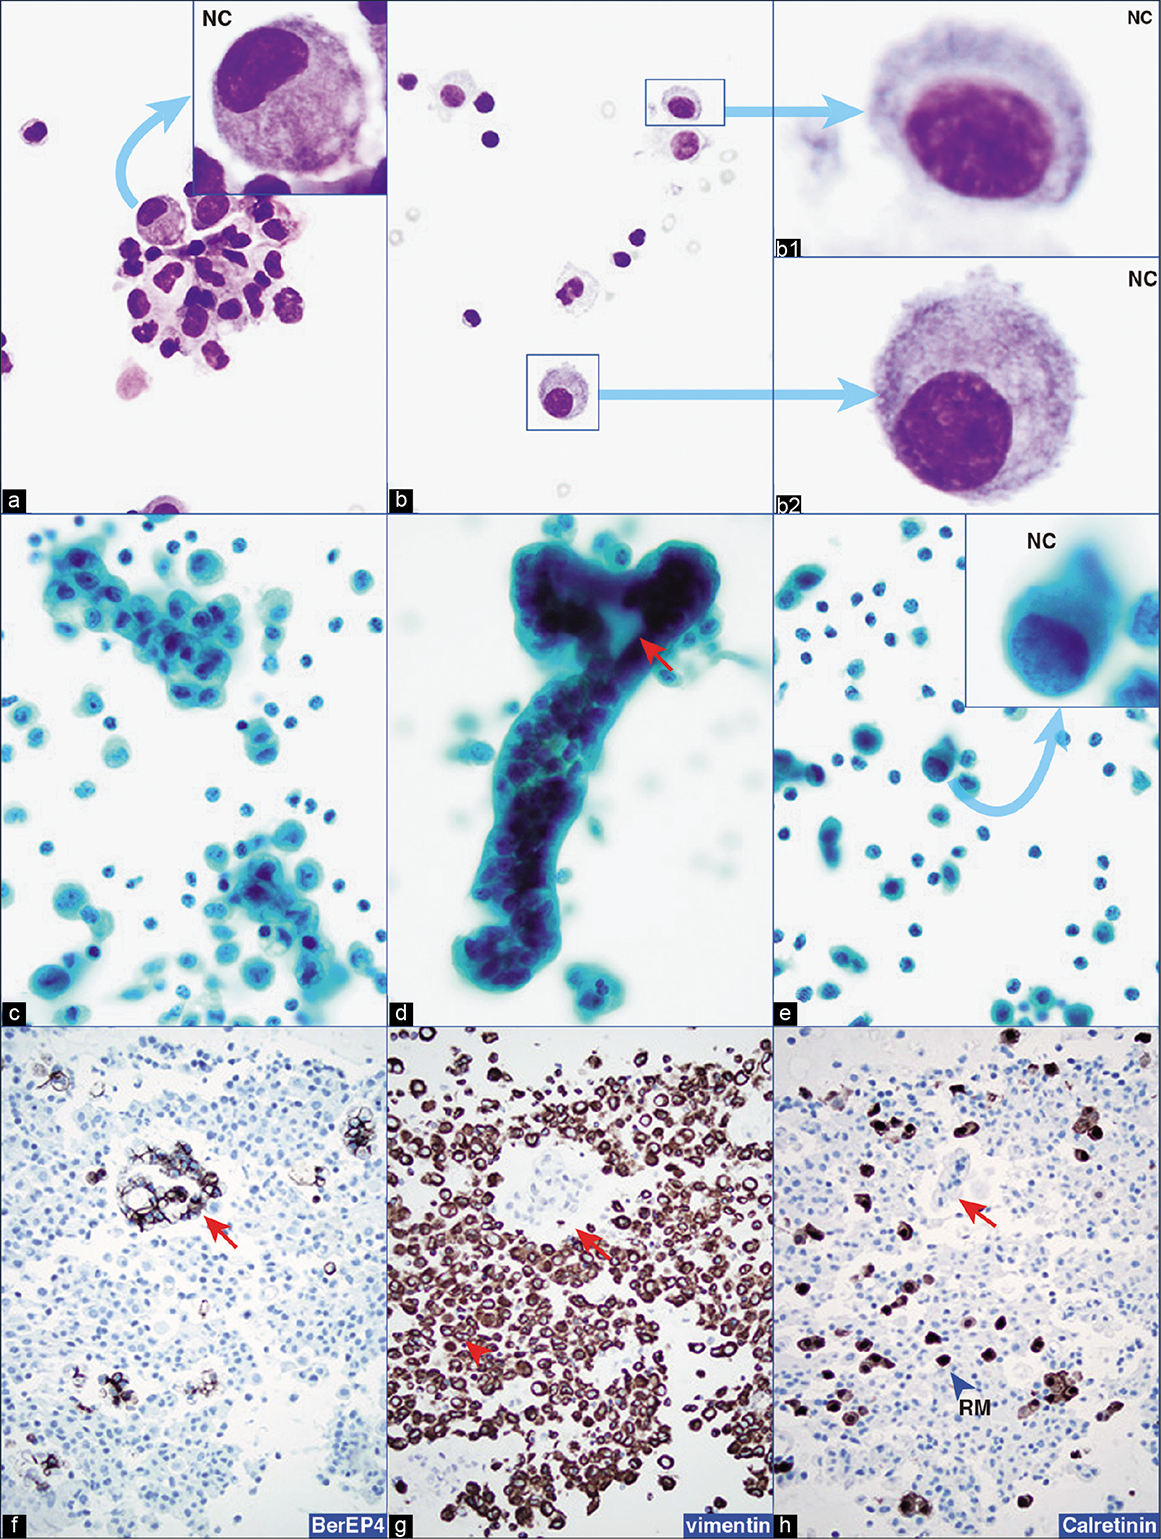 Metastatic pancreatic adenocarcinoma, peritoneal fluid. The neoplastic cells (NC) are seen as loosely cohesive groups (a) or as solitary cells (b,e) with eccentric nuclei. PAP-stained preparations facilitate evaluation of cellular details in cohesive groups (c,d). A few cell groups show gland-like structures (arrow in d). ‘A second population’ (arrows in f–h) of neoplastic cells is highlighted distinctly in immunostained cell-block sections f–h (the neoplastic cells are immunoreactive for BerEP4 in f, non-immunoreactive for vimentin in g, and calretinin in h). As inbuilt corresponding positive controls, inflammatory and reactive mesothelial cells (arrowhead in g) are immunoreactive for vimentin and reactive mesothelial cells (arrowhead RM in h) are immunoreactive for calretinin. The patient had pancreatic adenocarcinoma. NC, neoplastic cell; RM, reactive mesothelial cell. [a,b, DQ-stained Cytospin smear; c–e, PAP-stained SurePath smear; f–h, immunostained cell-block sections (a–e, 100X; f–h, 40X).]